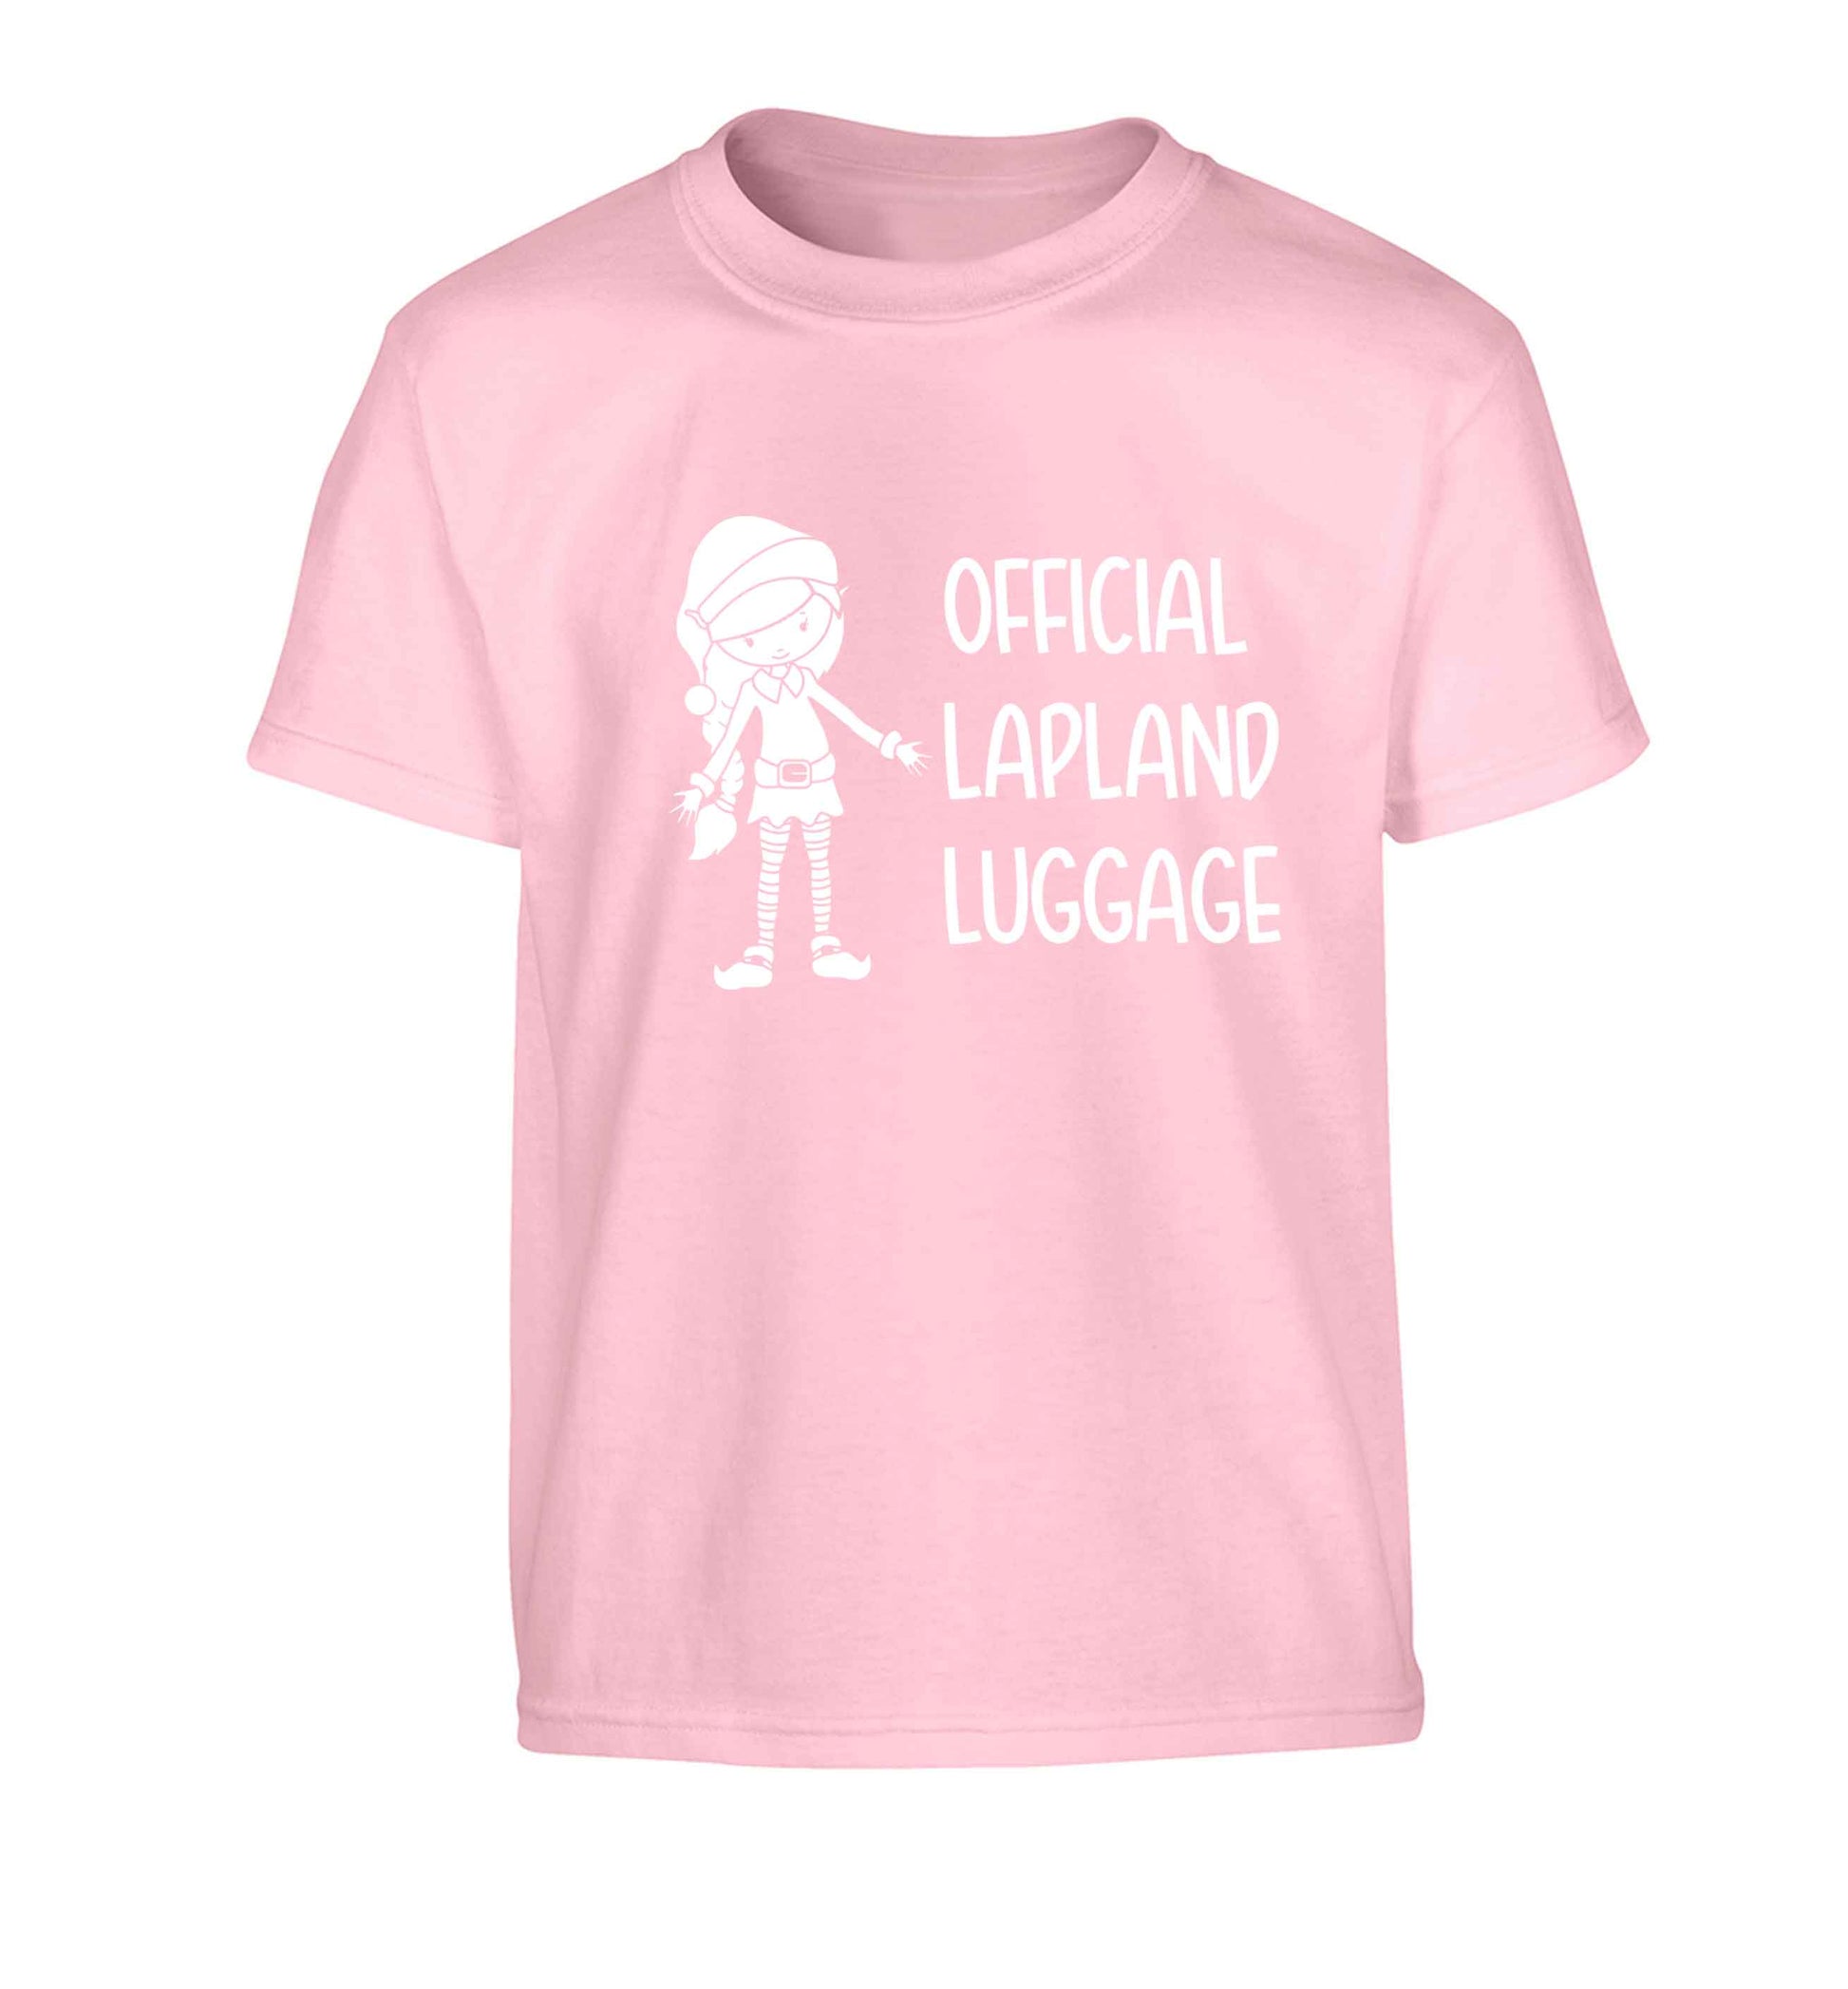 Official lapland luggage - Elf snowflake Children's light pink Tshirt 12-13 Years